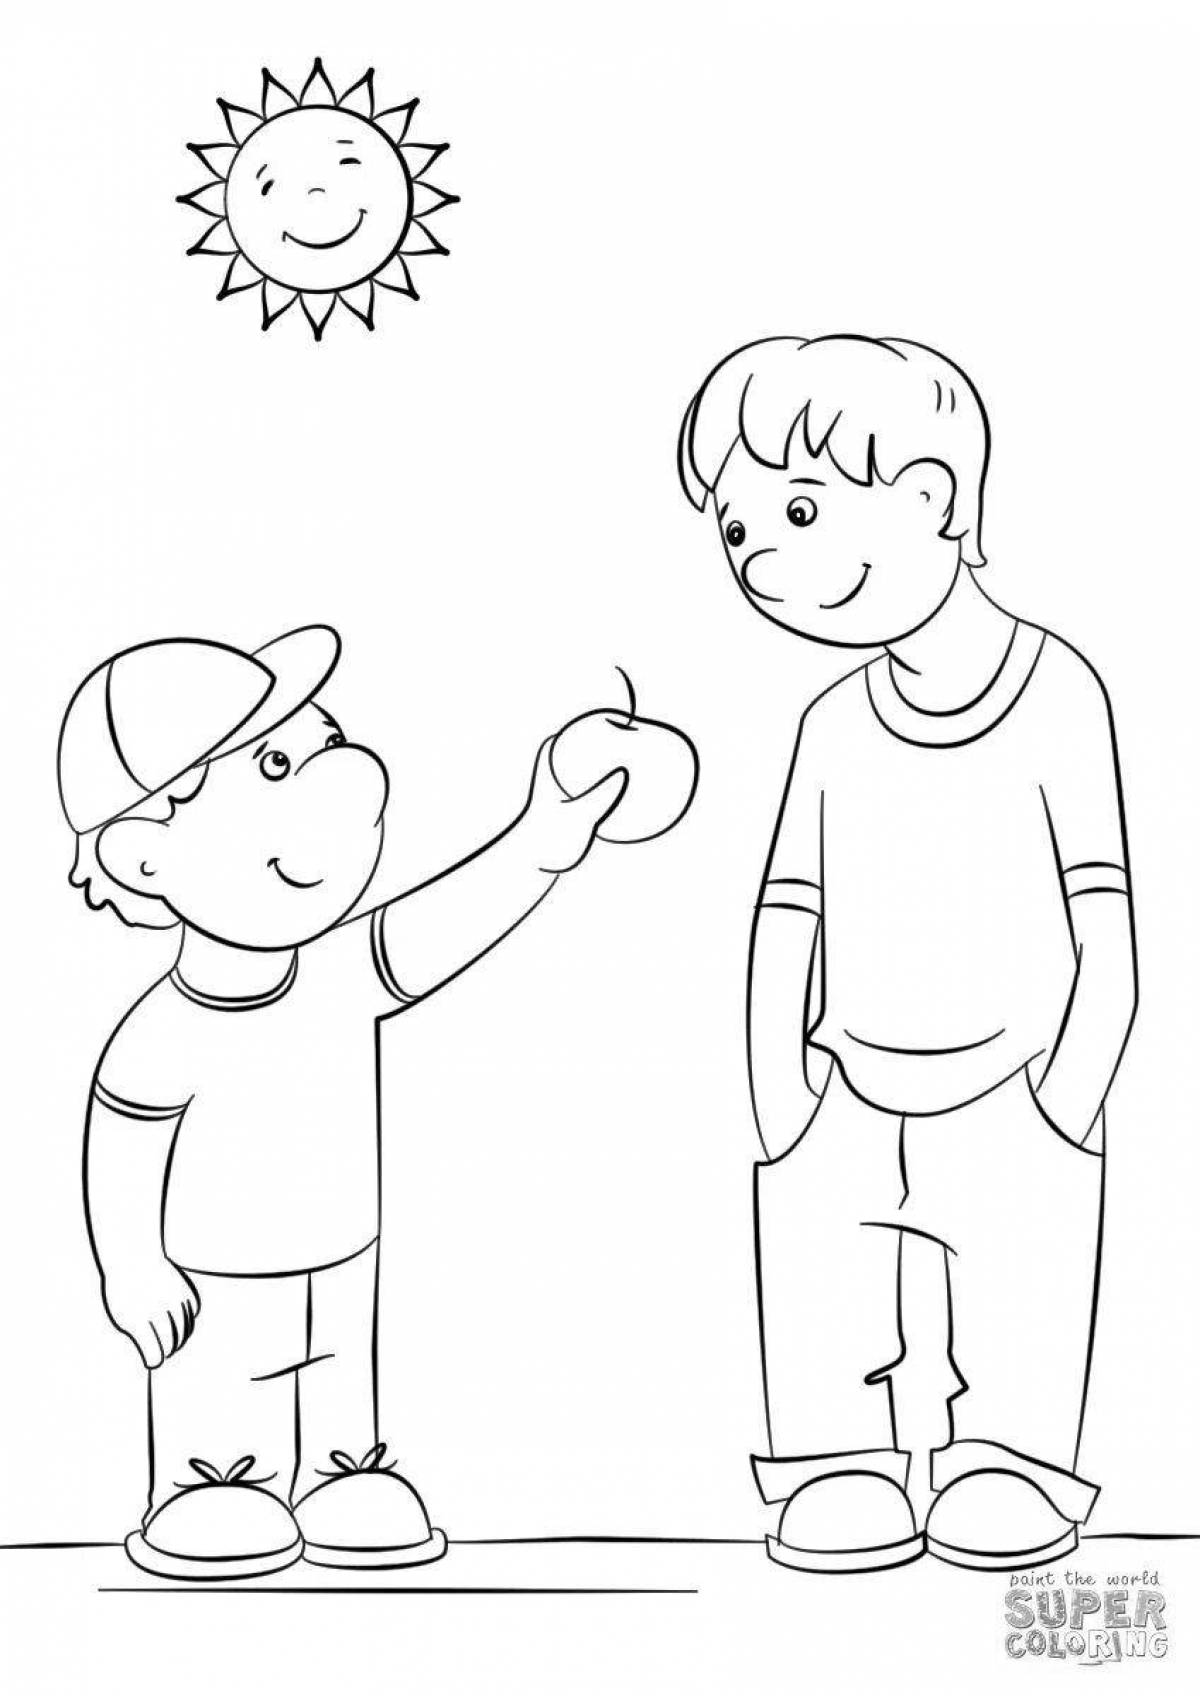 Coloring page charming friend